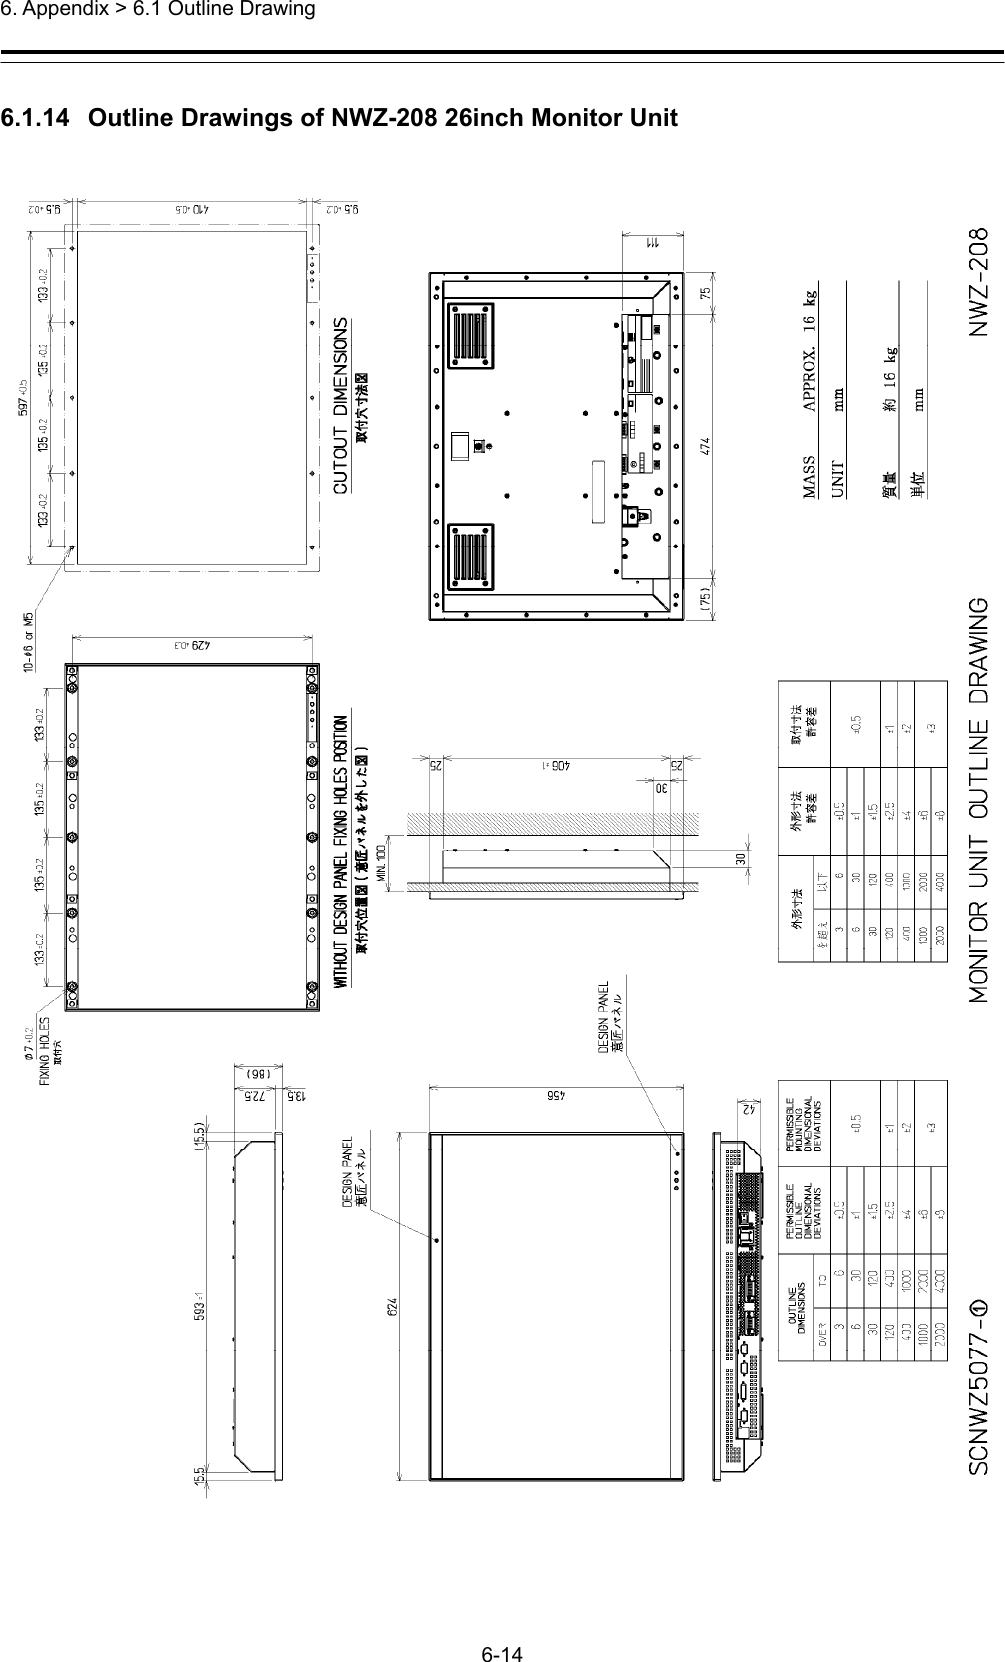  6. Appendix &gt; 6.1 Outline Drawing 6-14  6.1.14   Outline Drawings of NWZ-208 26inch Monitor Unit  